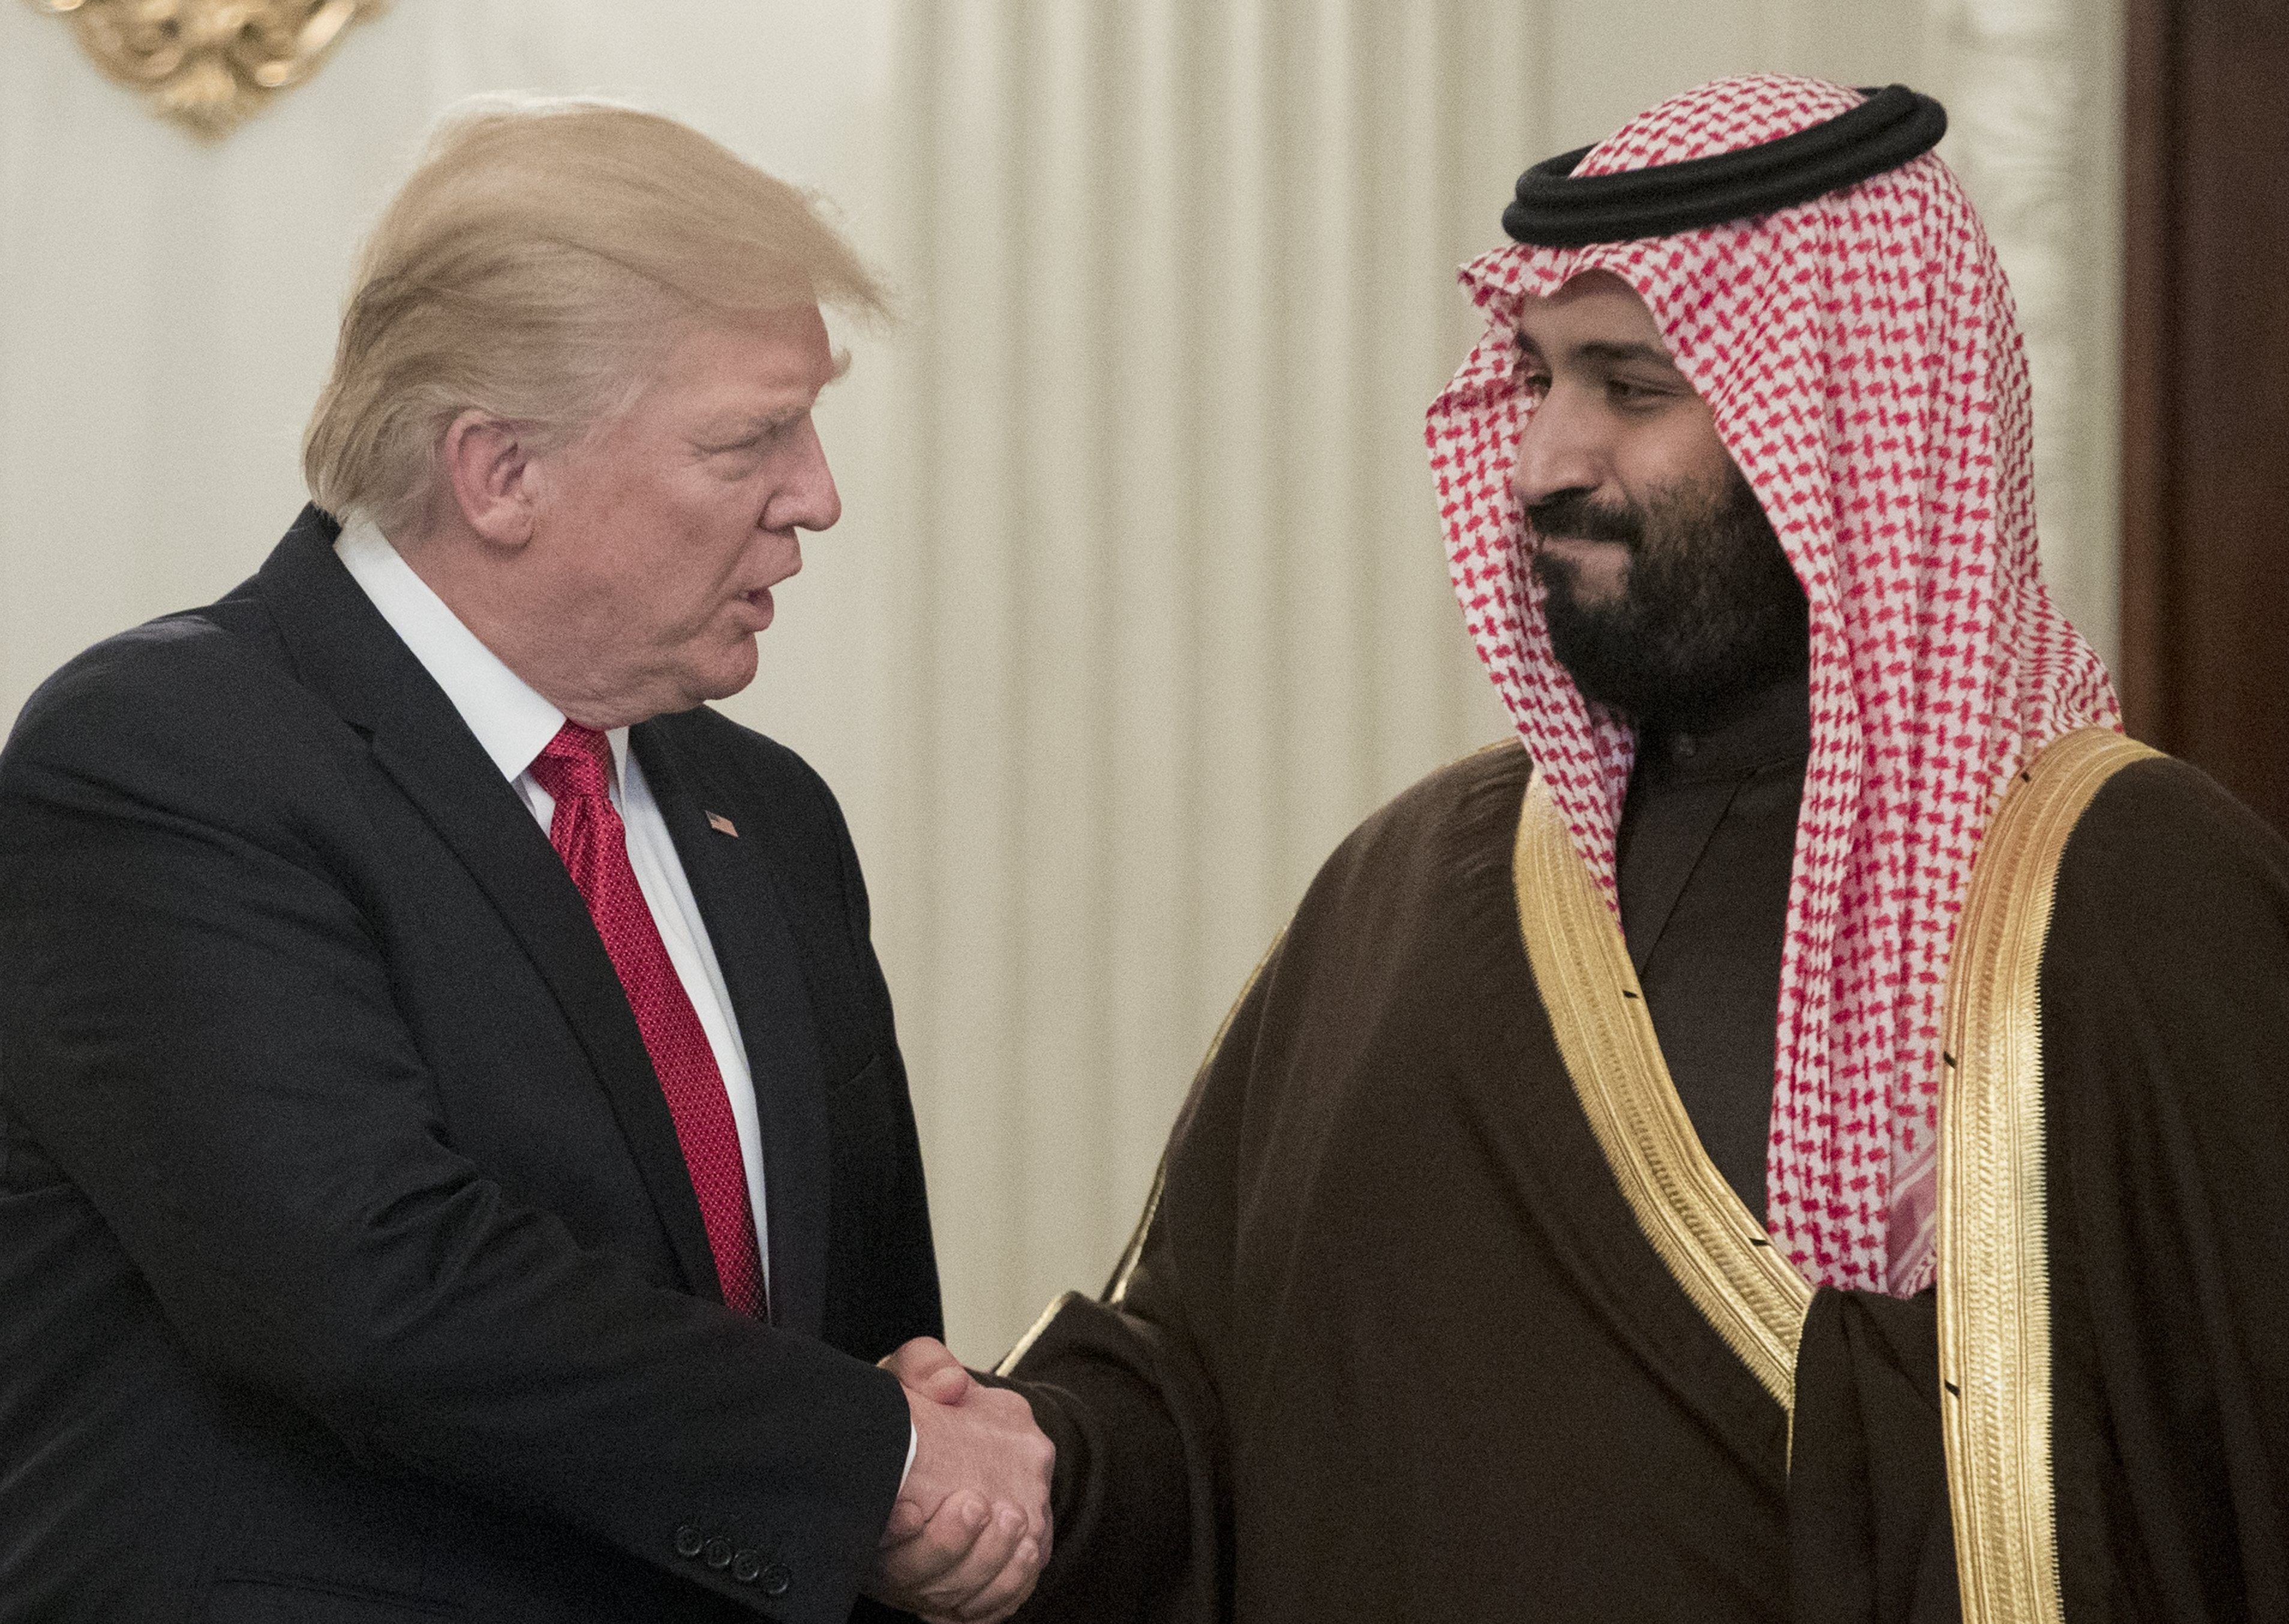 2017-03-14 12:13:11 epa05848113 US President Donald J. Trump (L) shakes hands with Mohammed bin Salman bin Abdulaziz Al Saud (R), Deputy Crown Prince and Minister of Defense of the Kingdom of Saudi Arabia, before a lunch in the State Dining Room of the White House in Washington, DC, USA, 14 March 2017. EPA/MICHAEL REYNOLDS